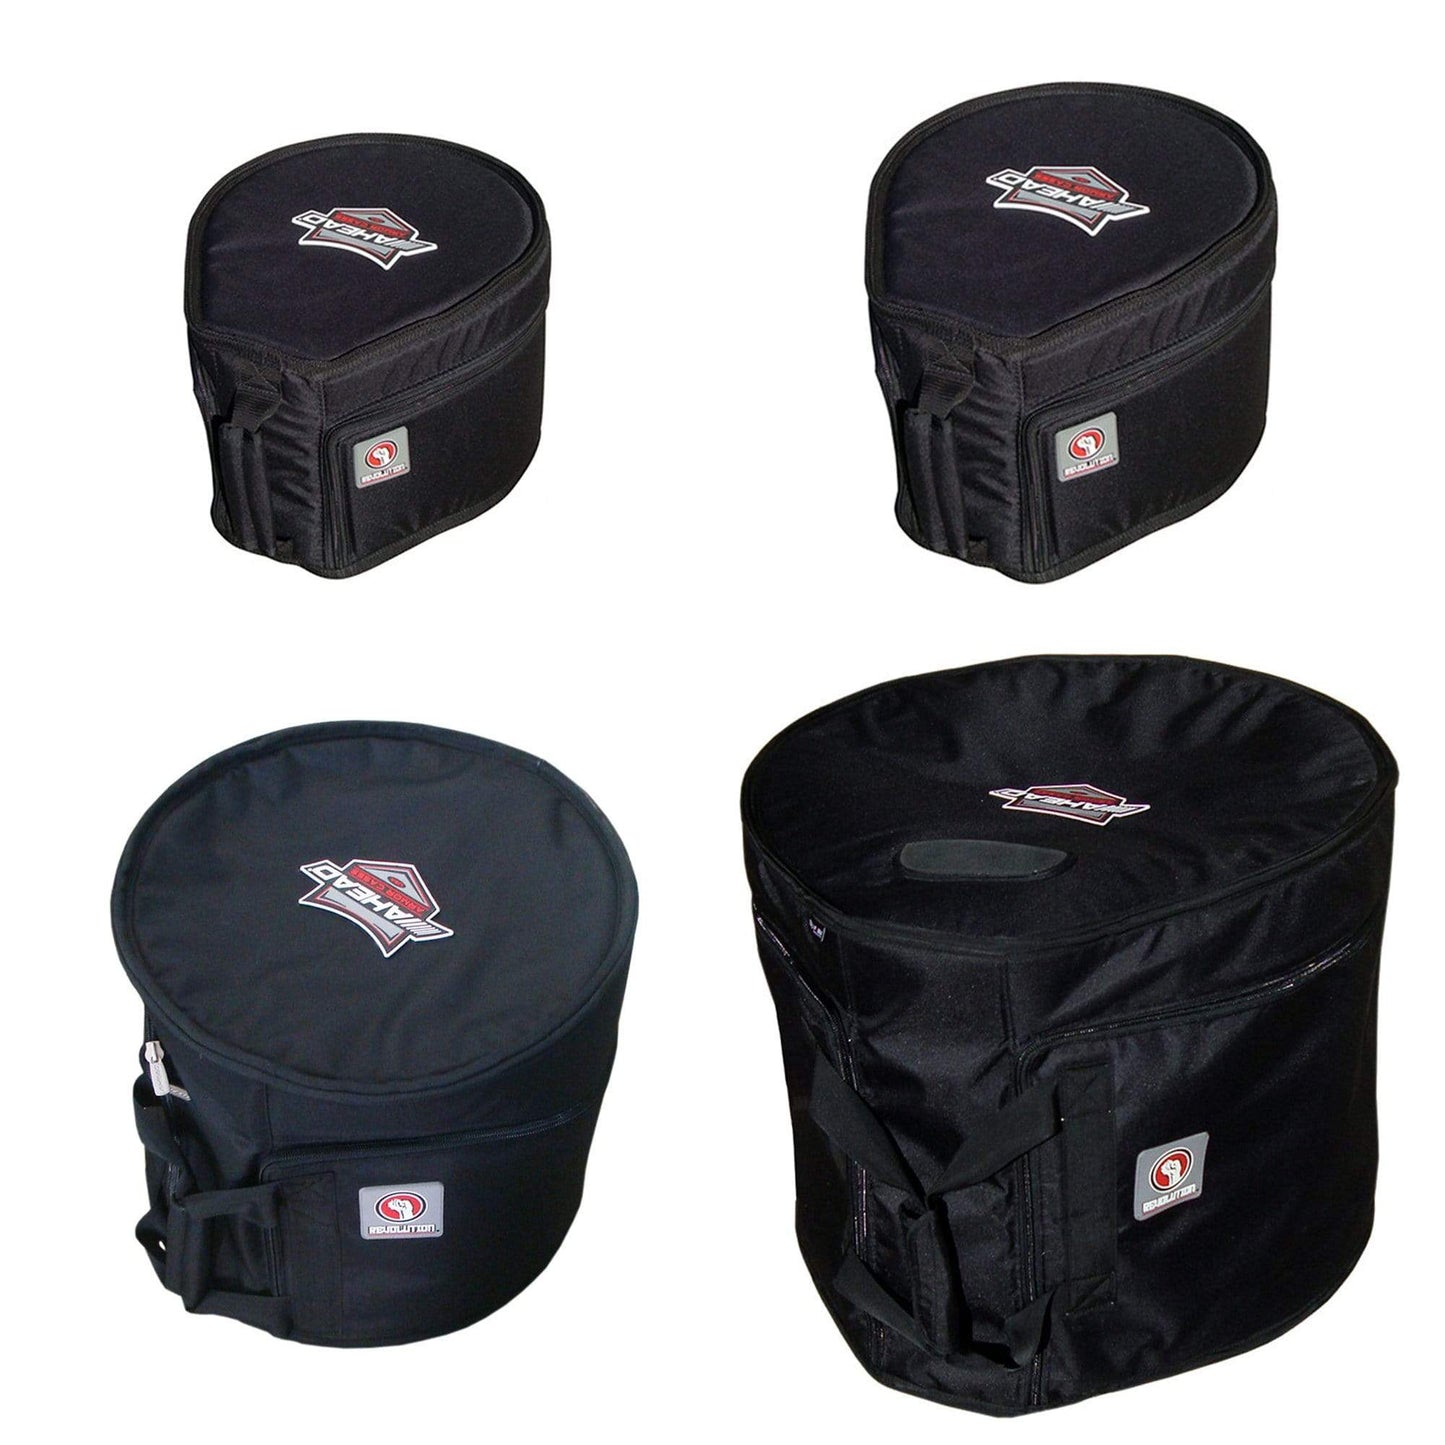 Ahead Armor 10x8/12x9/16x16/22x16 Drum Soft Case (4 Pack Bundle) Drums and Percussion / Parts and Accessories / Cases and Bags